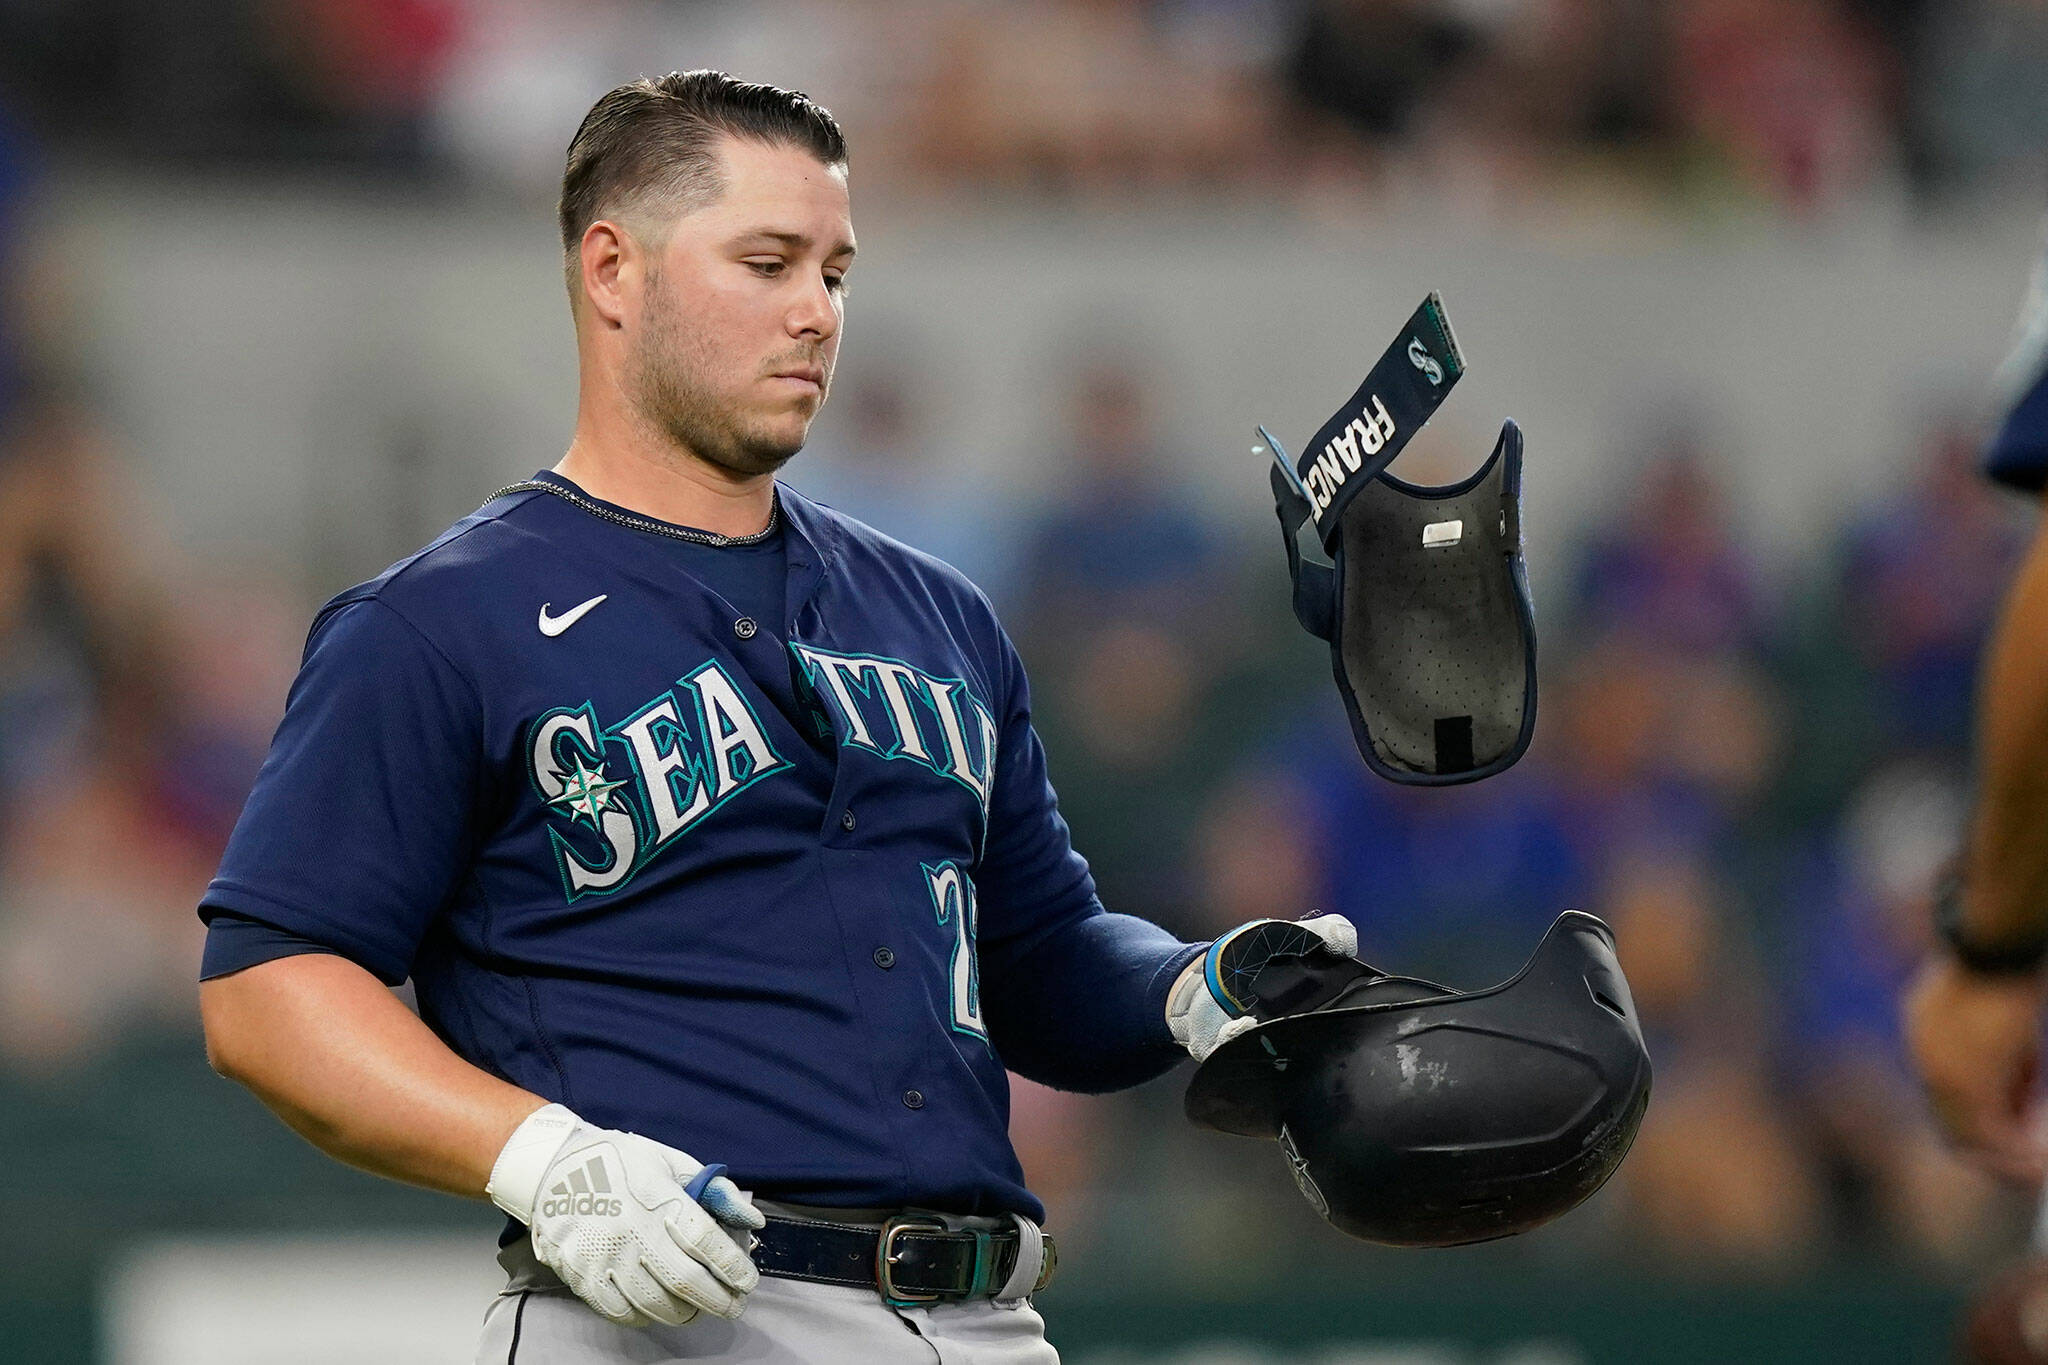 Clutch hits elude Mariners in loss to Rangers | HeraldNet.com